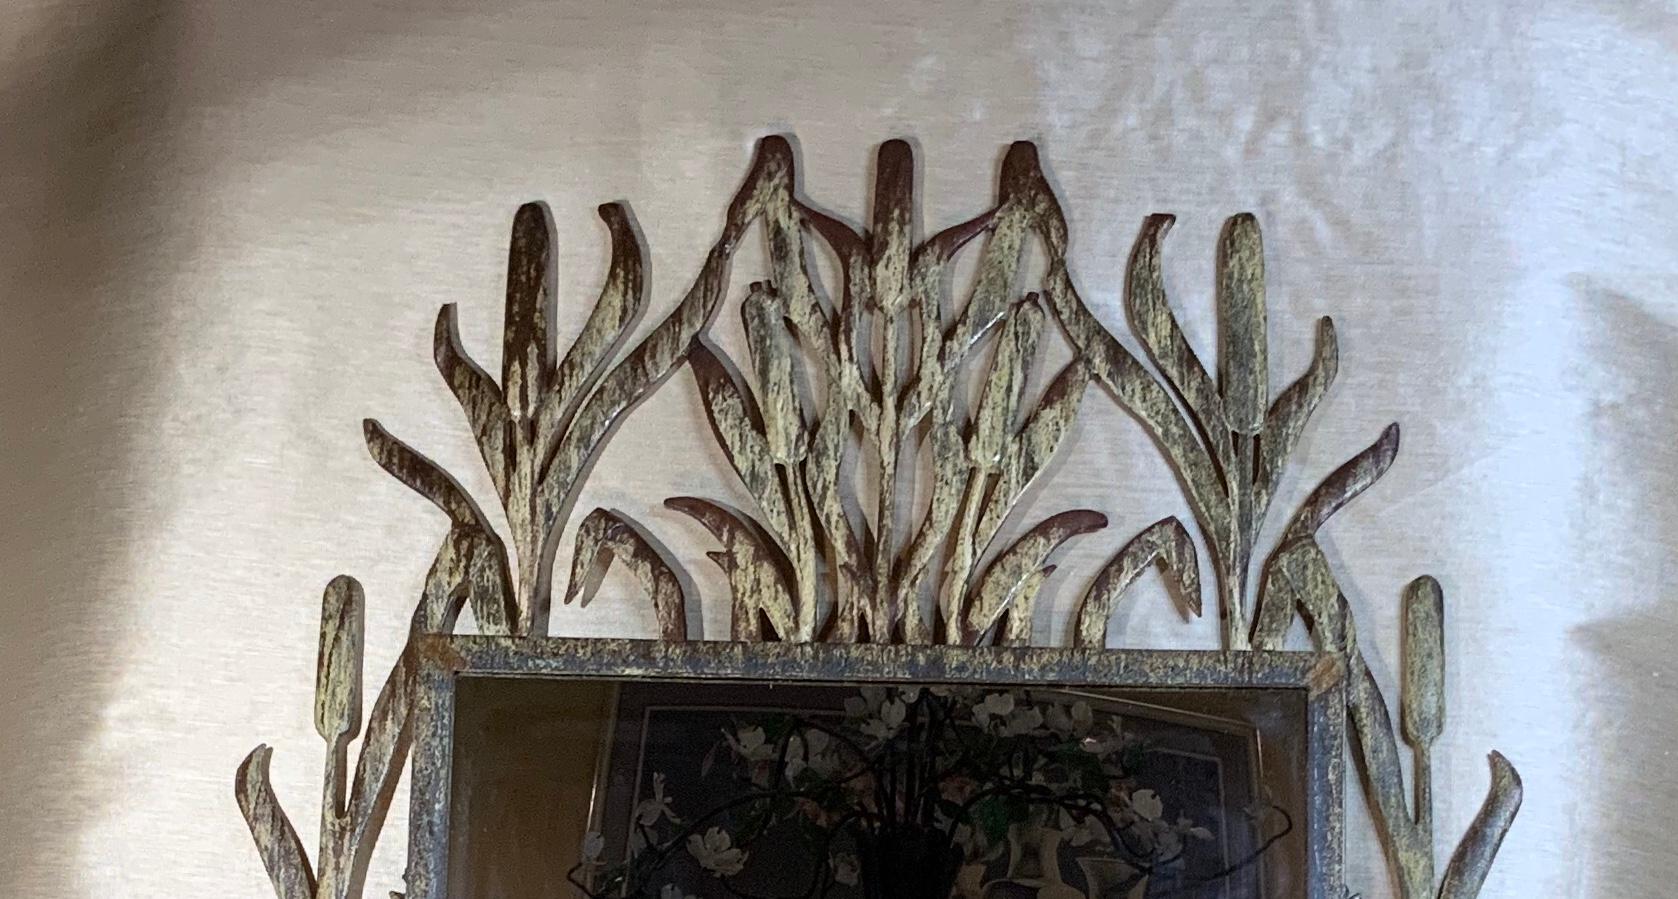 Exceptional mirror made of iron, unusual cat tail motif beautifully enhanced patina treated for rust. Beautiful object of art for wall display.
Mirror size only: 22”.5 x 28”.5.